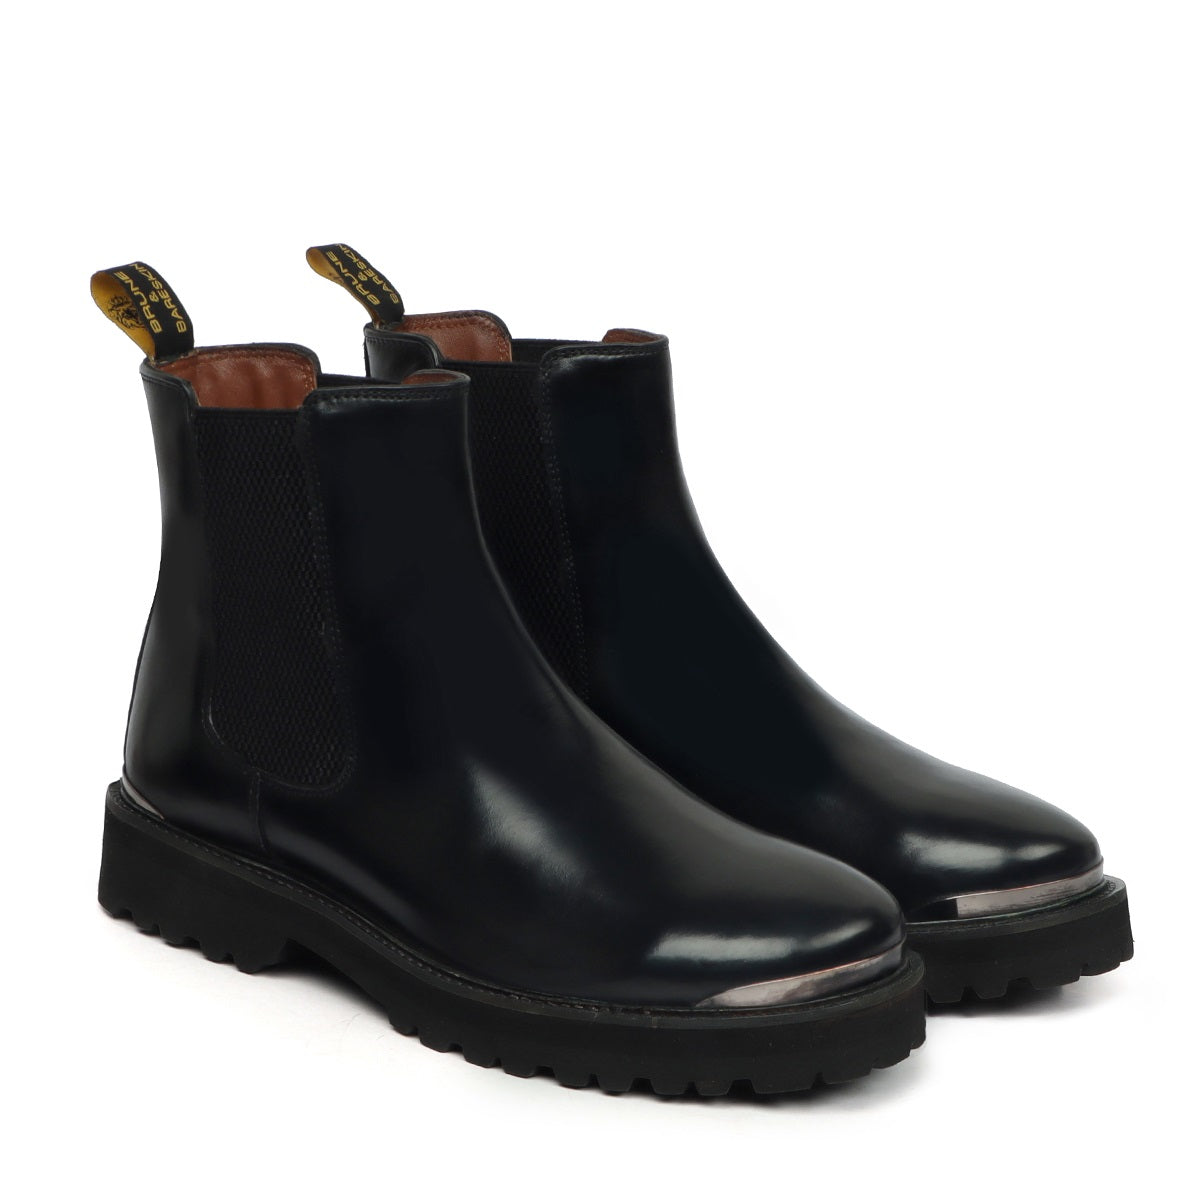 Men's Black Leather High Ankle Chelsea Boots with Leather Sole one and only by Brune & Bareskin